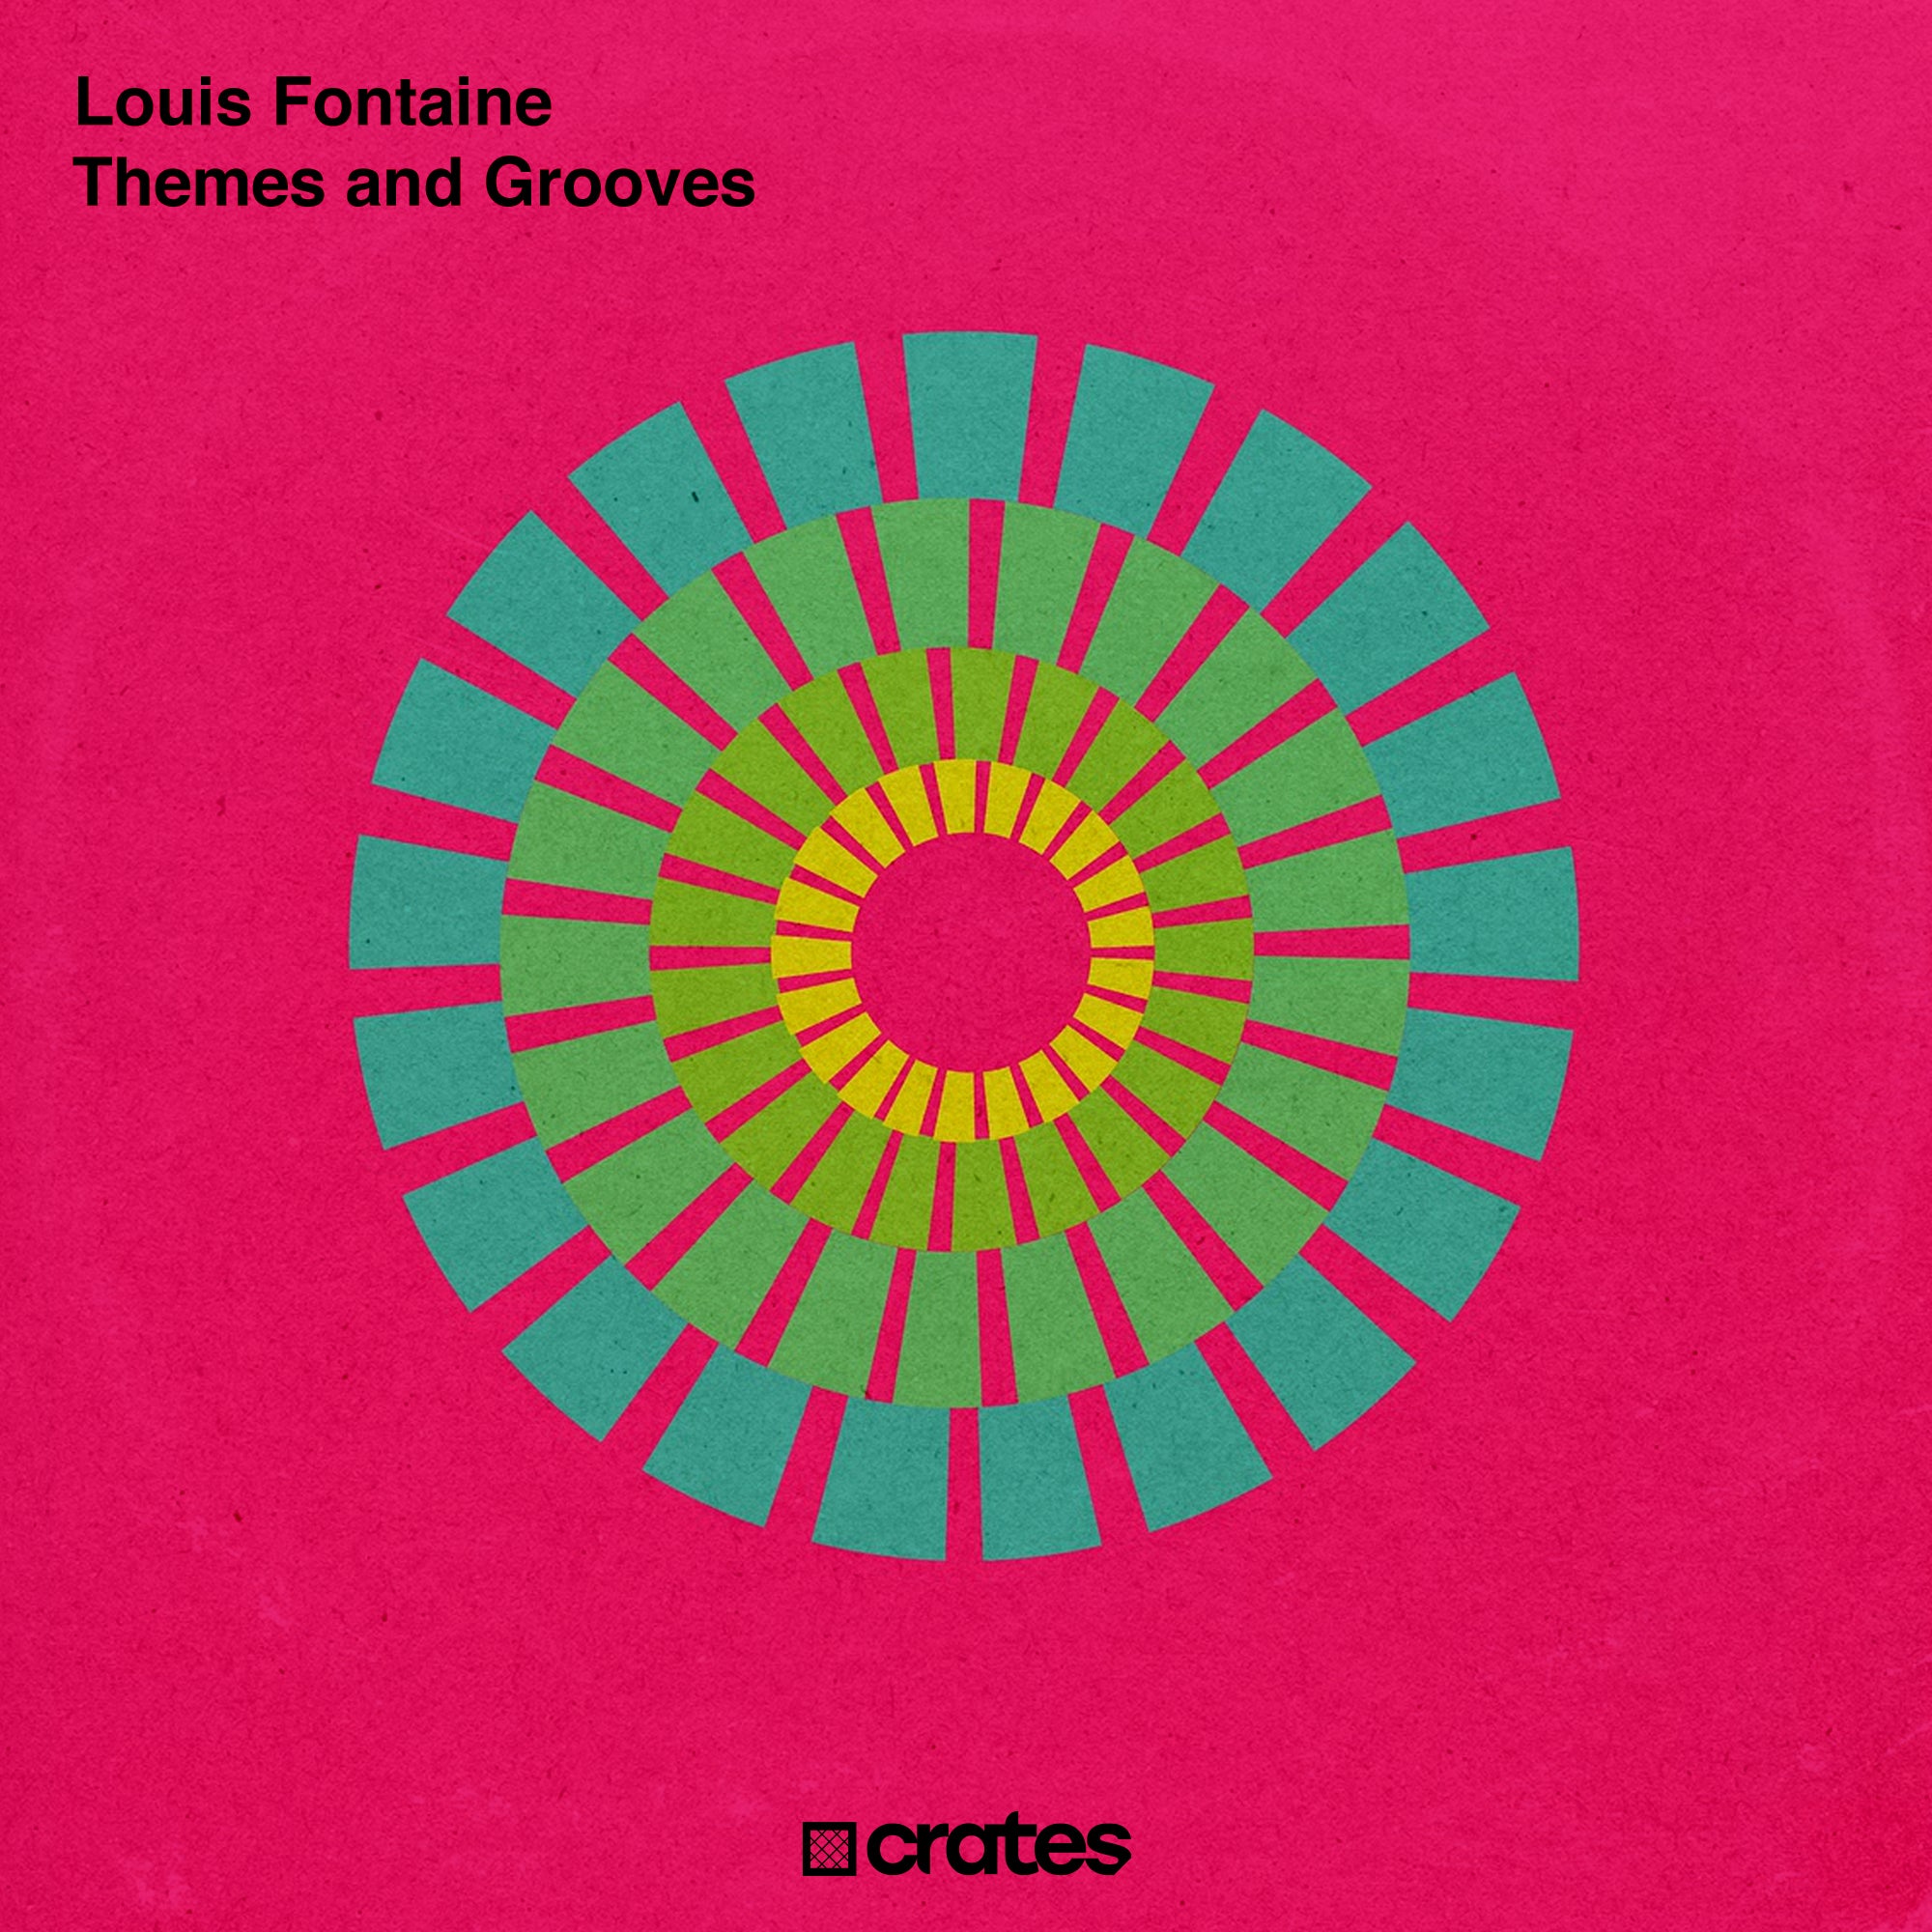 https://crates.whosampled.com/cdn/shop/files/LouisFontaine_Themes_Grooves_COVER_2048x2048.jpg?v=1702663797